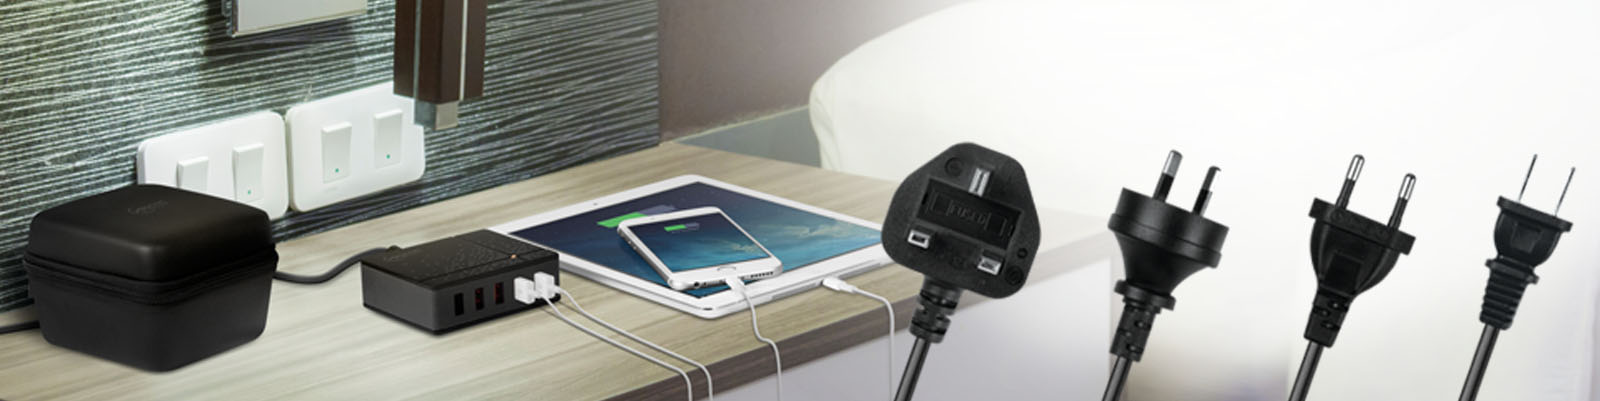 Global_Charger_8000_04_C